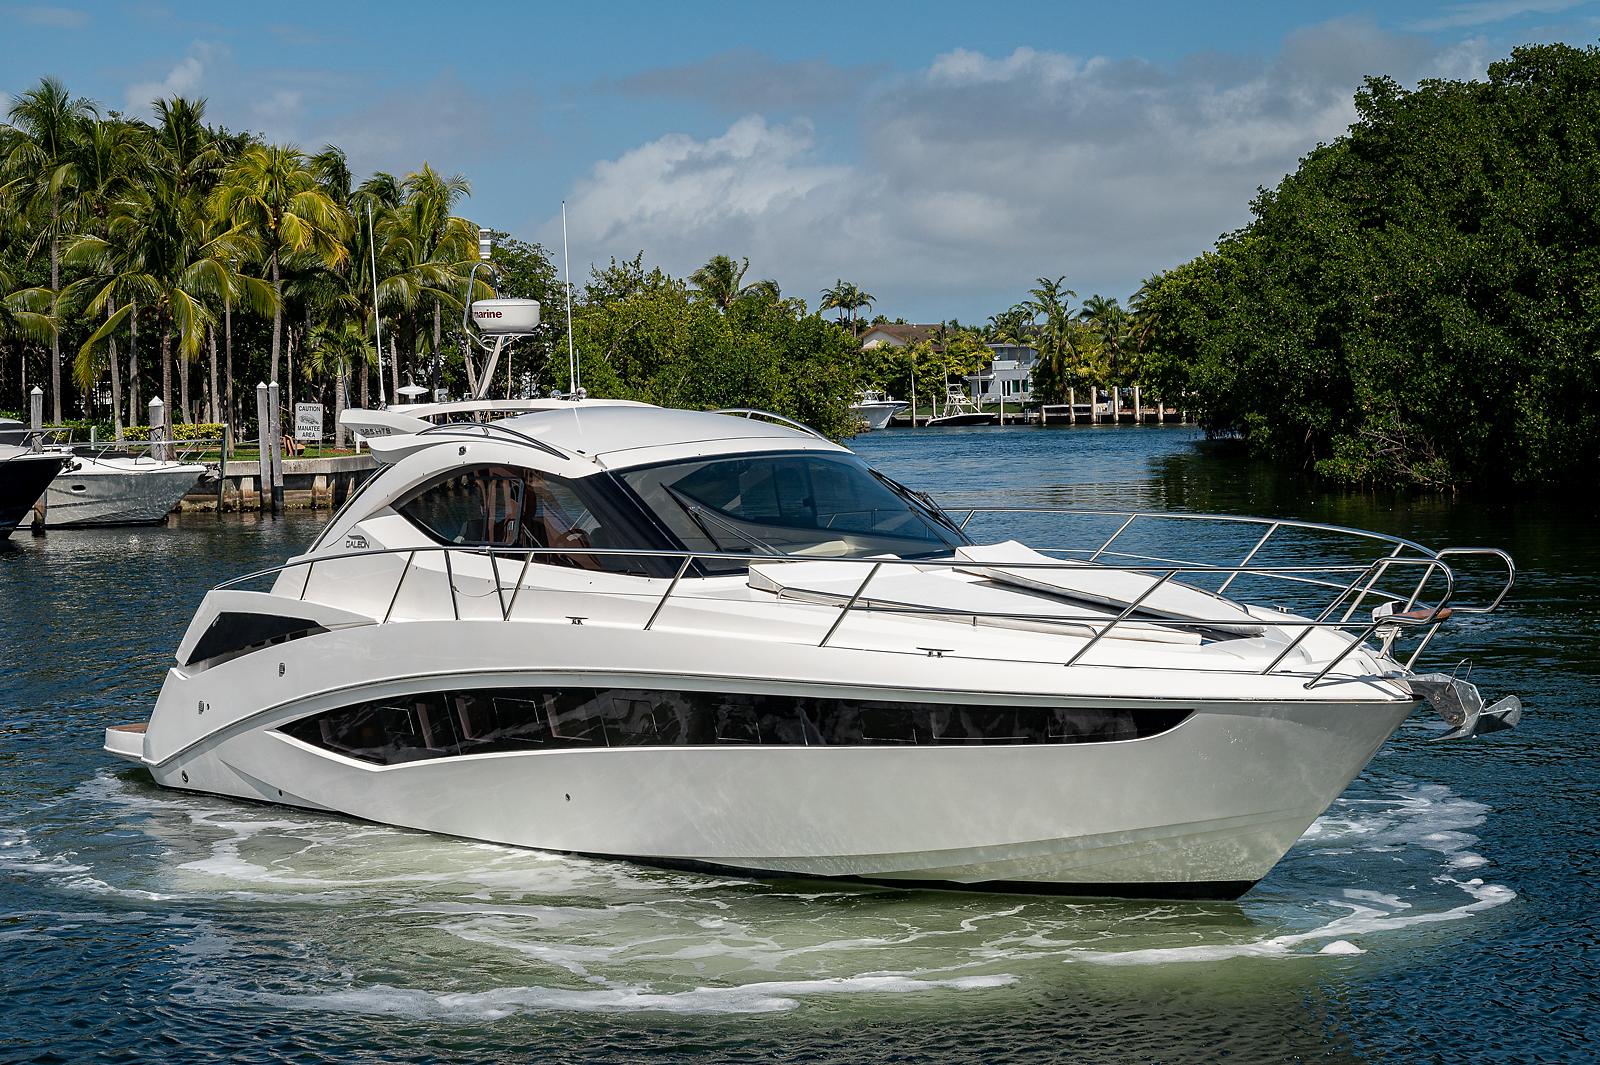 Used Galeon Yachts for Sale | HMY Yachts